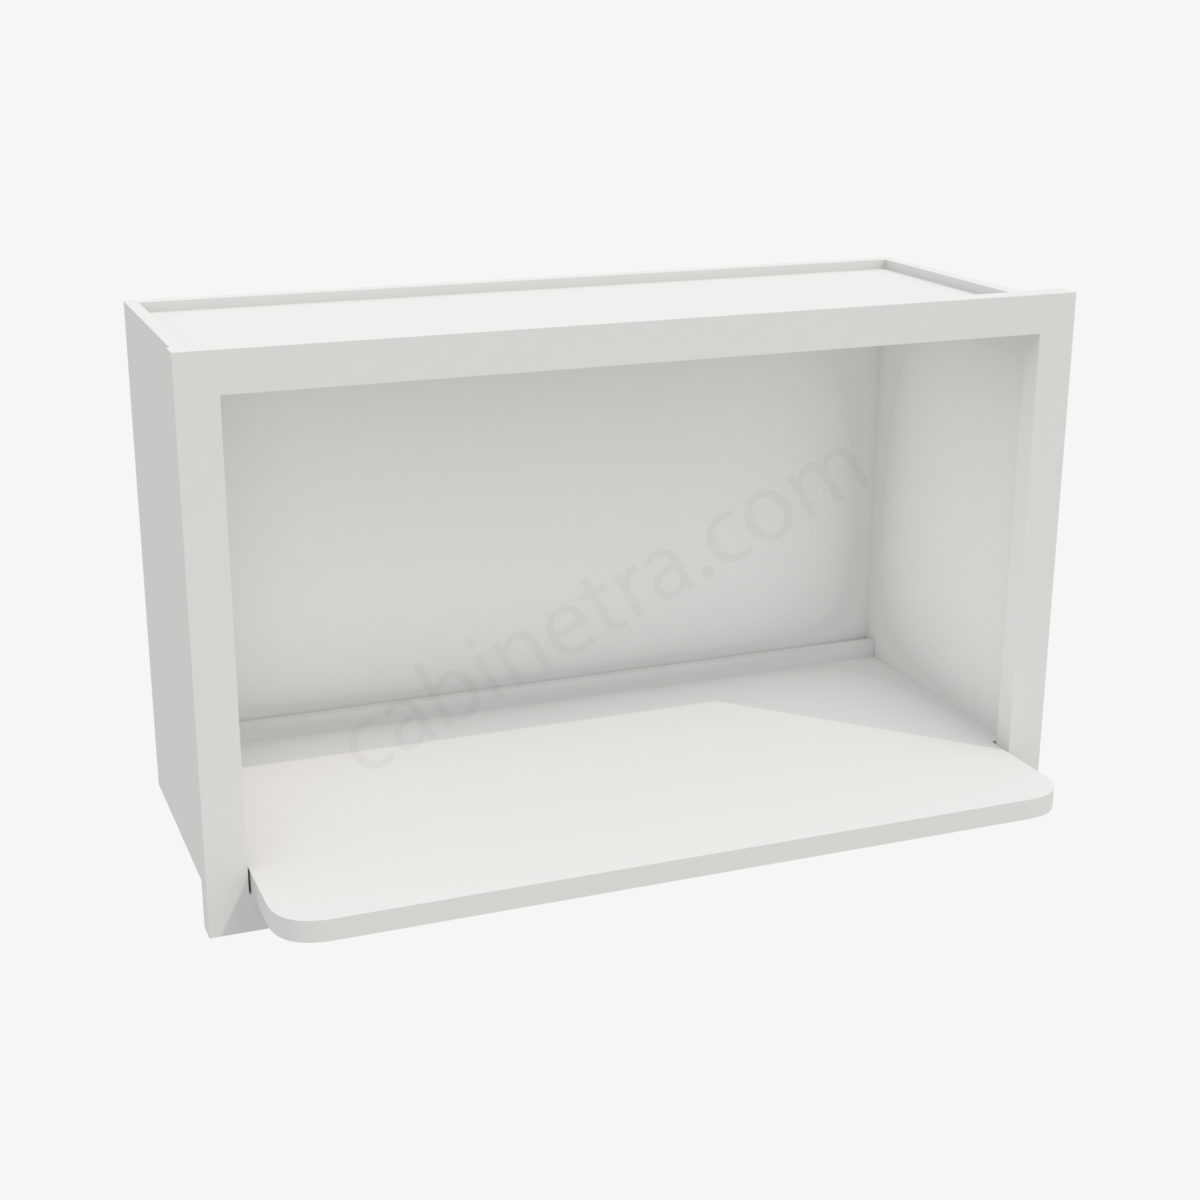 AW MWO3018PM 12 1 Forevermark Ice White Shaker Cabinetra scaled